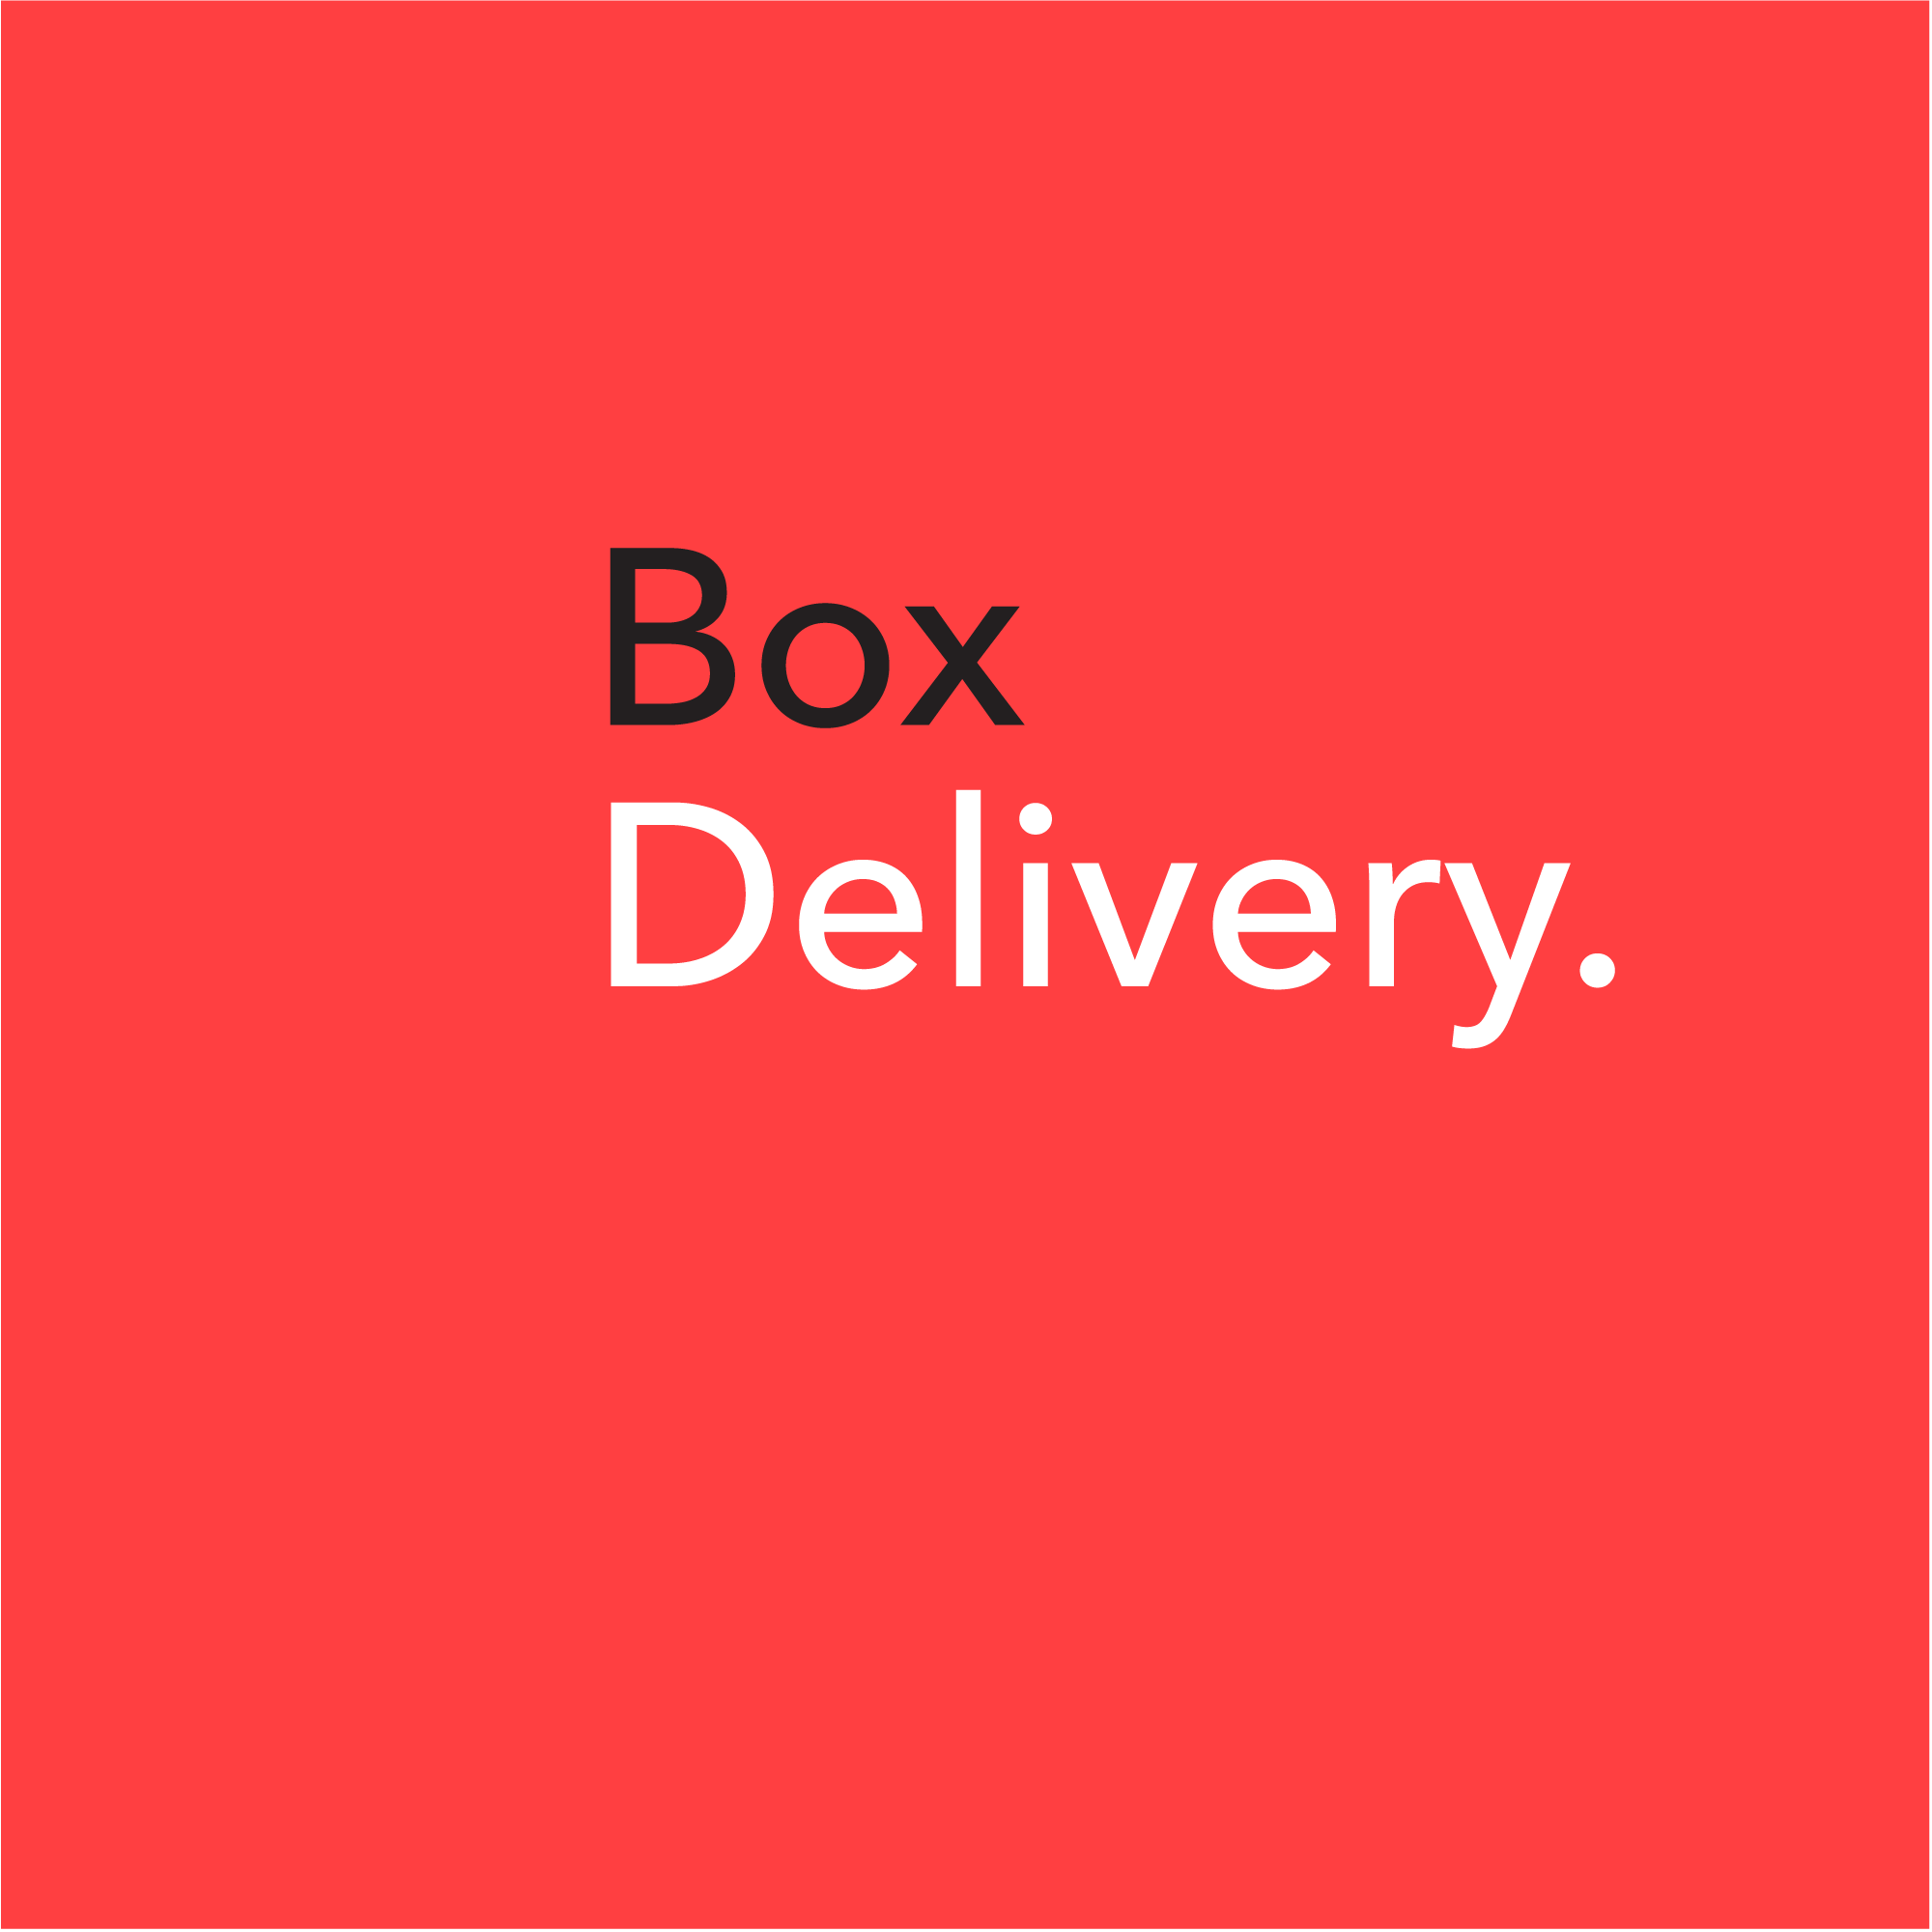 BoxDelivery.be